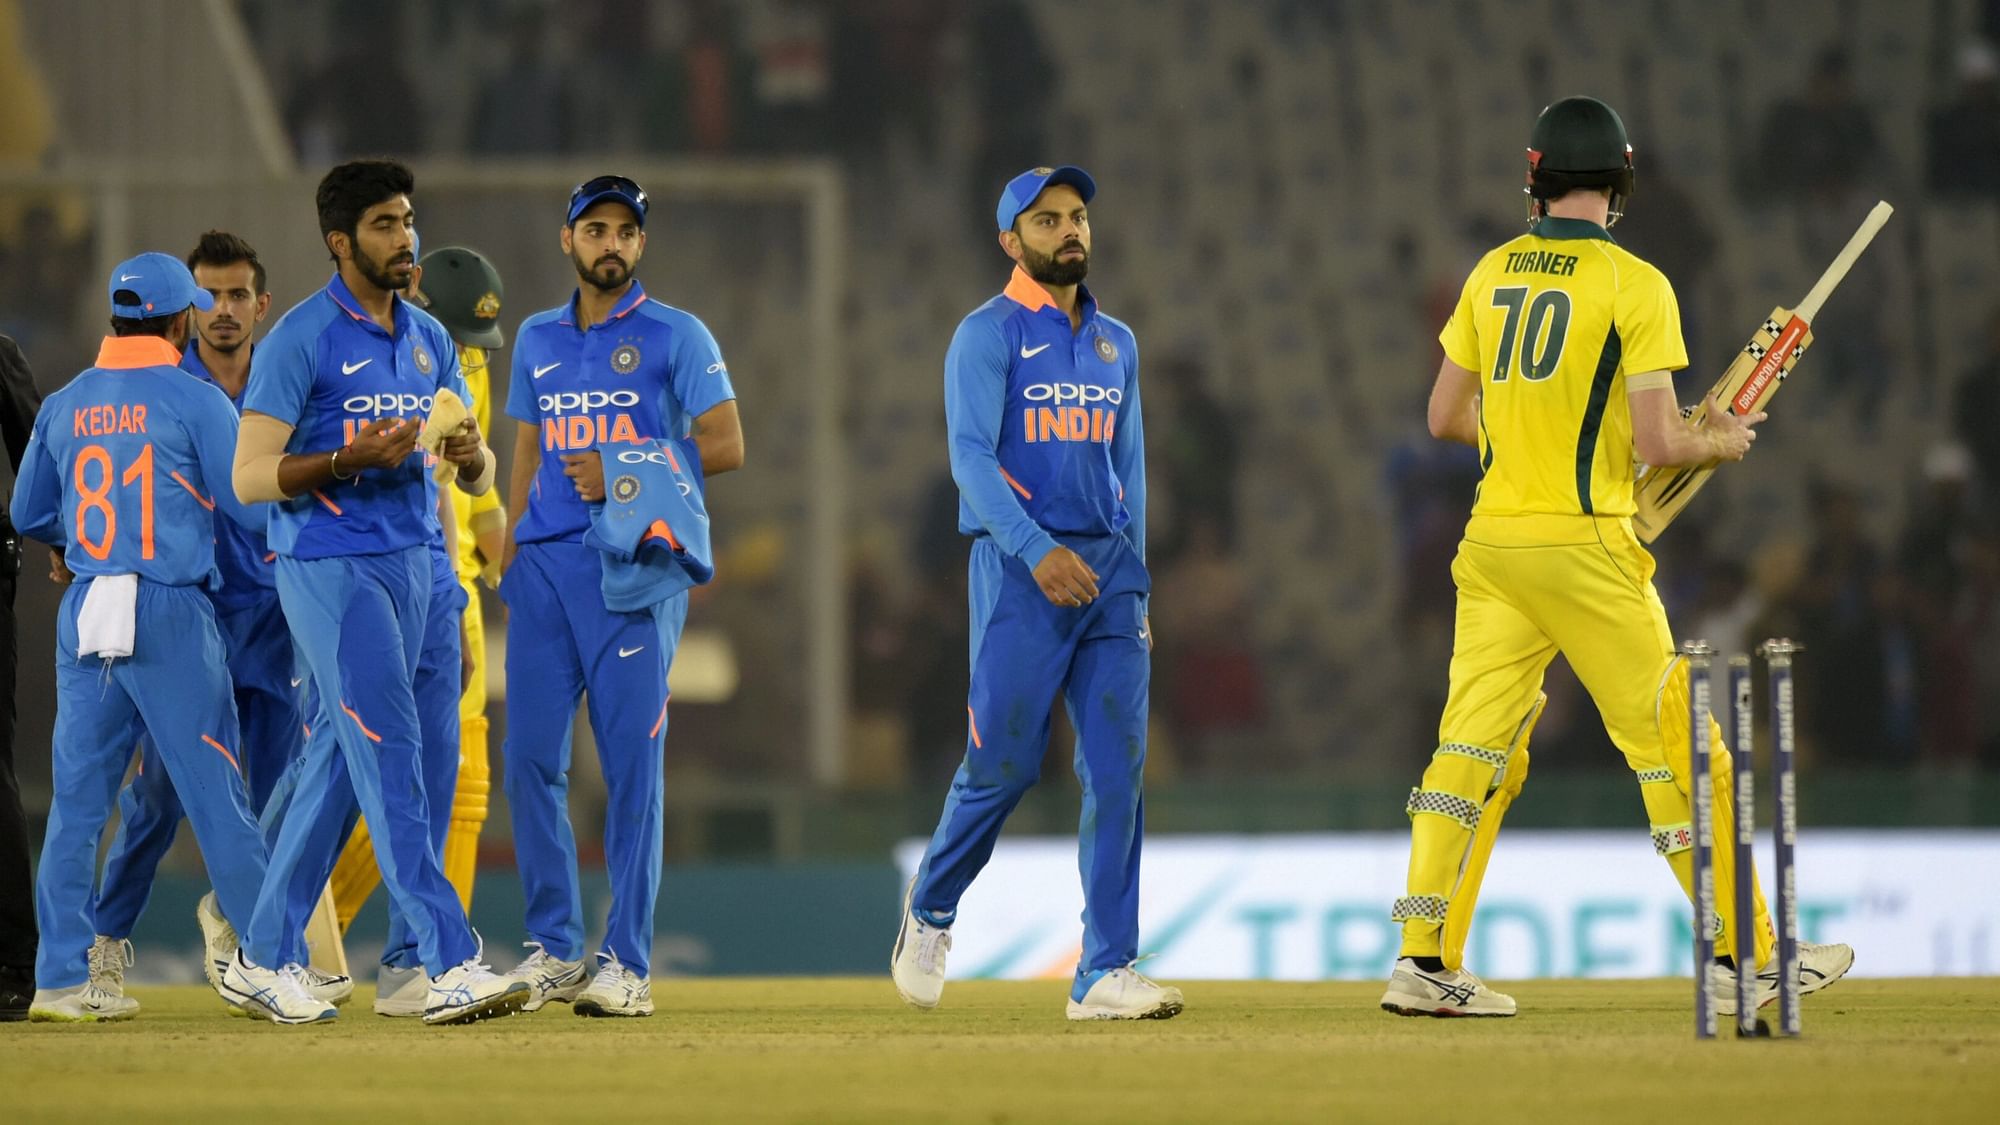 Indian skipper Virat Kohli along with teammates walk off the field after losing 4th ODI cricket match against Australia, in Mohali on 10 March 2019.